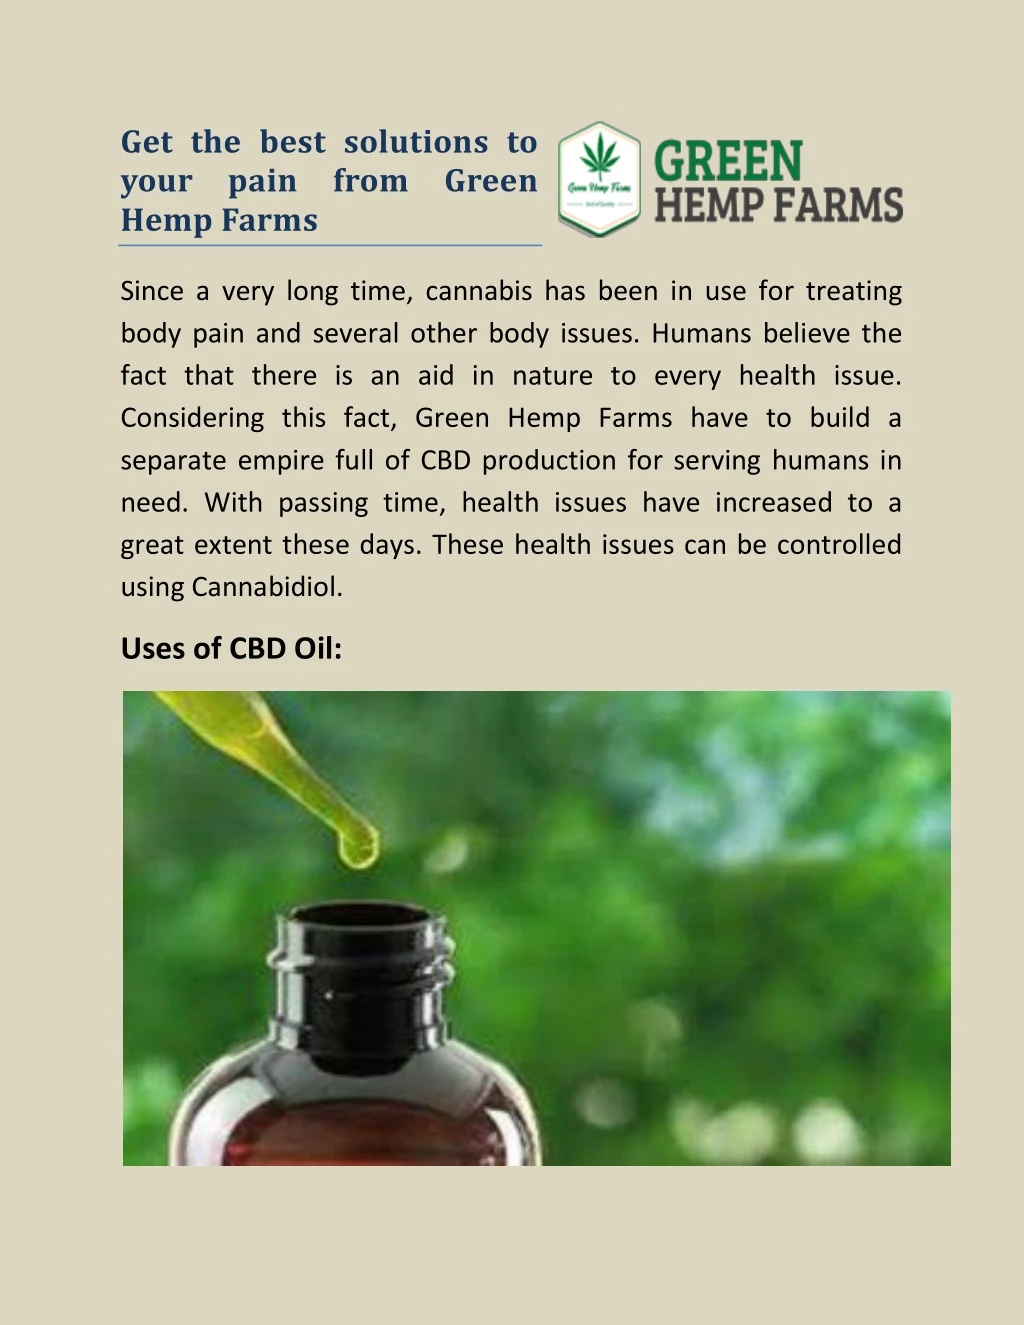 get the best solutions to your pain from green